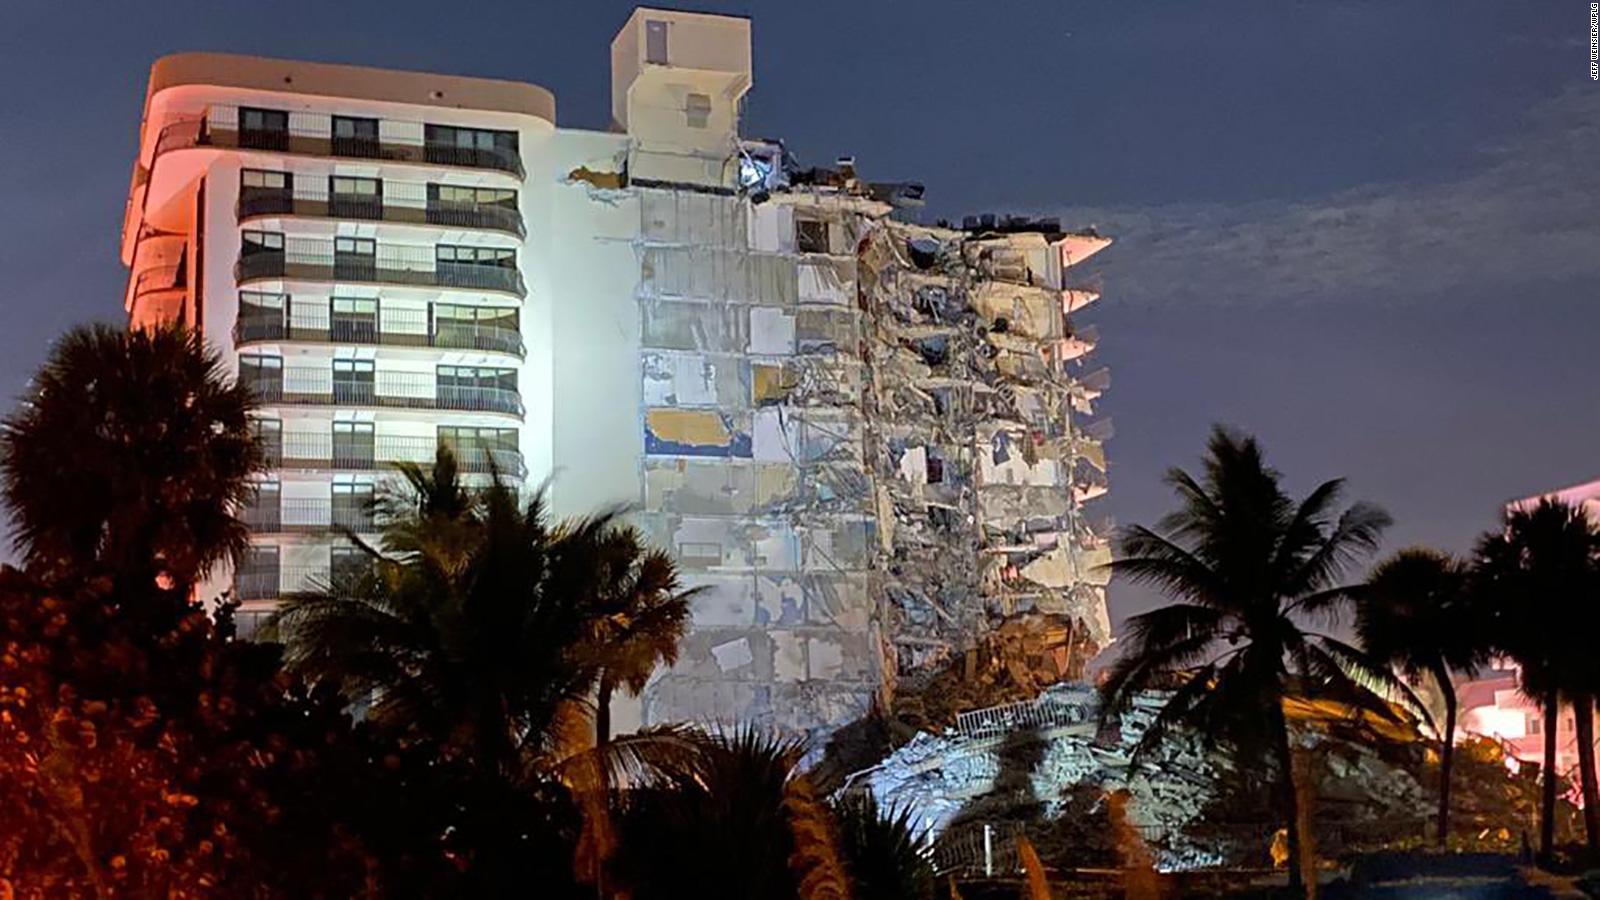 Miami-Dade building collapse: A multistory building in Surfside, Florida, has partially ...